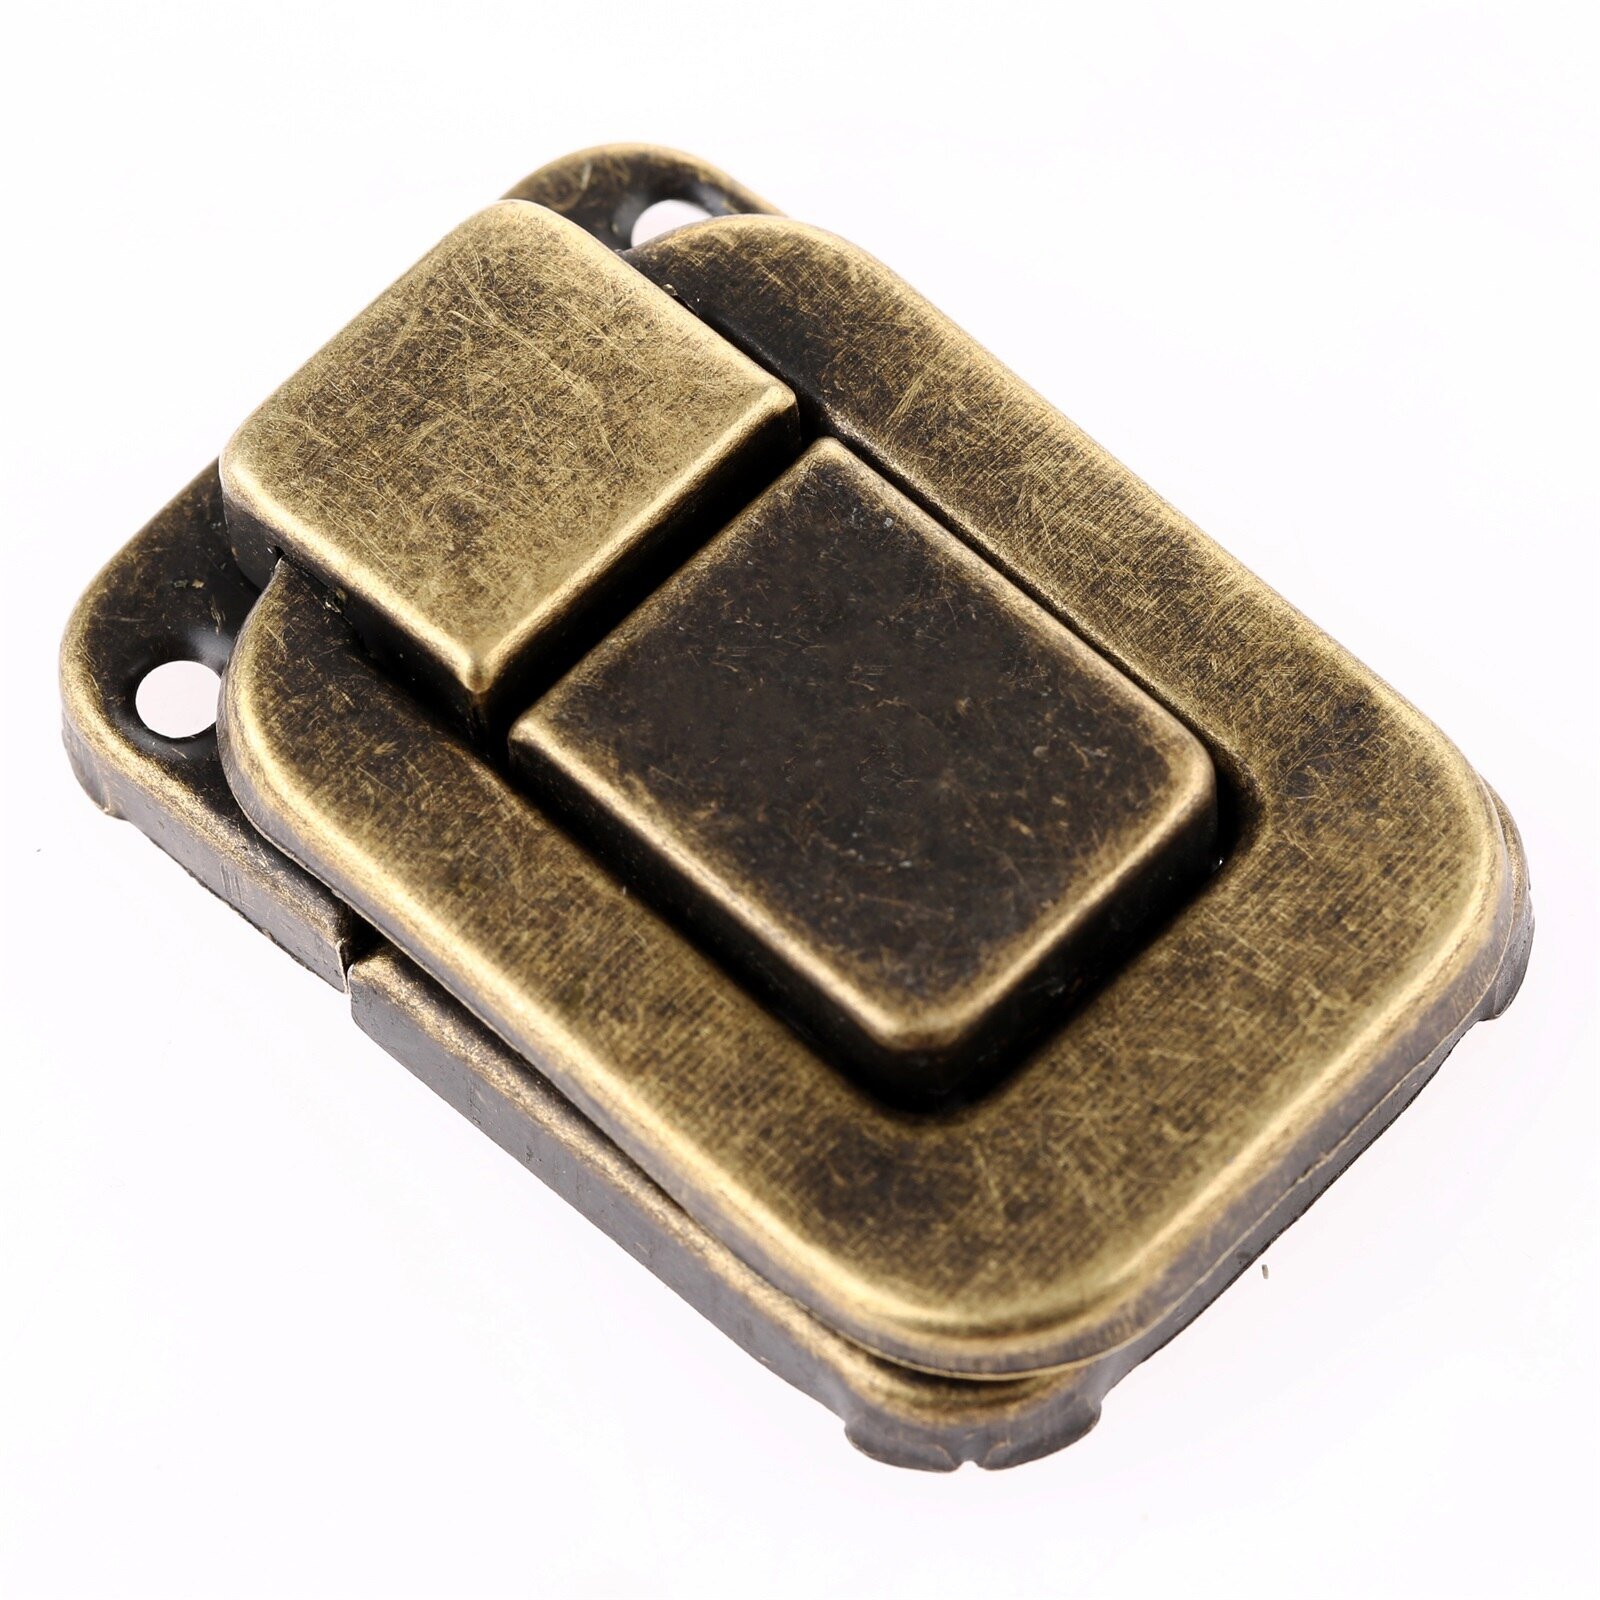 1x 48*32mm Lock Catch Latches for Jewelry Chest Box Suitcase Buckle Clip Clasp Vintage Hardware